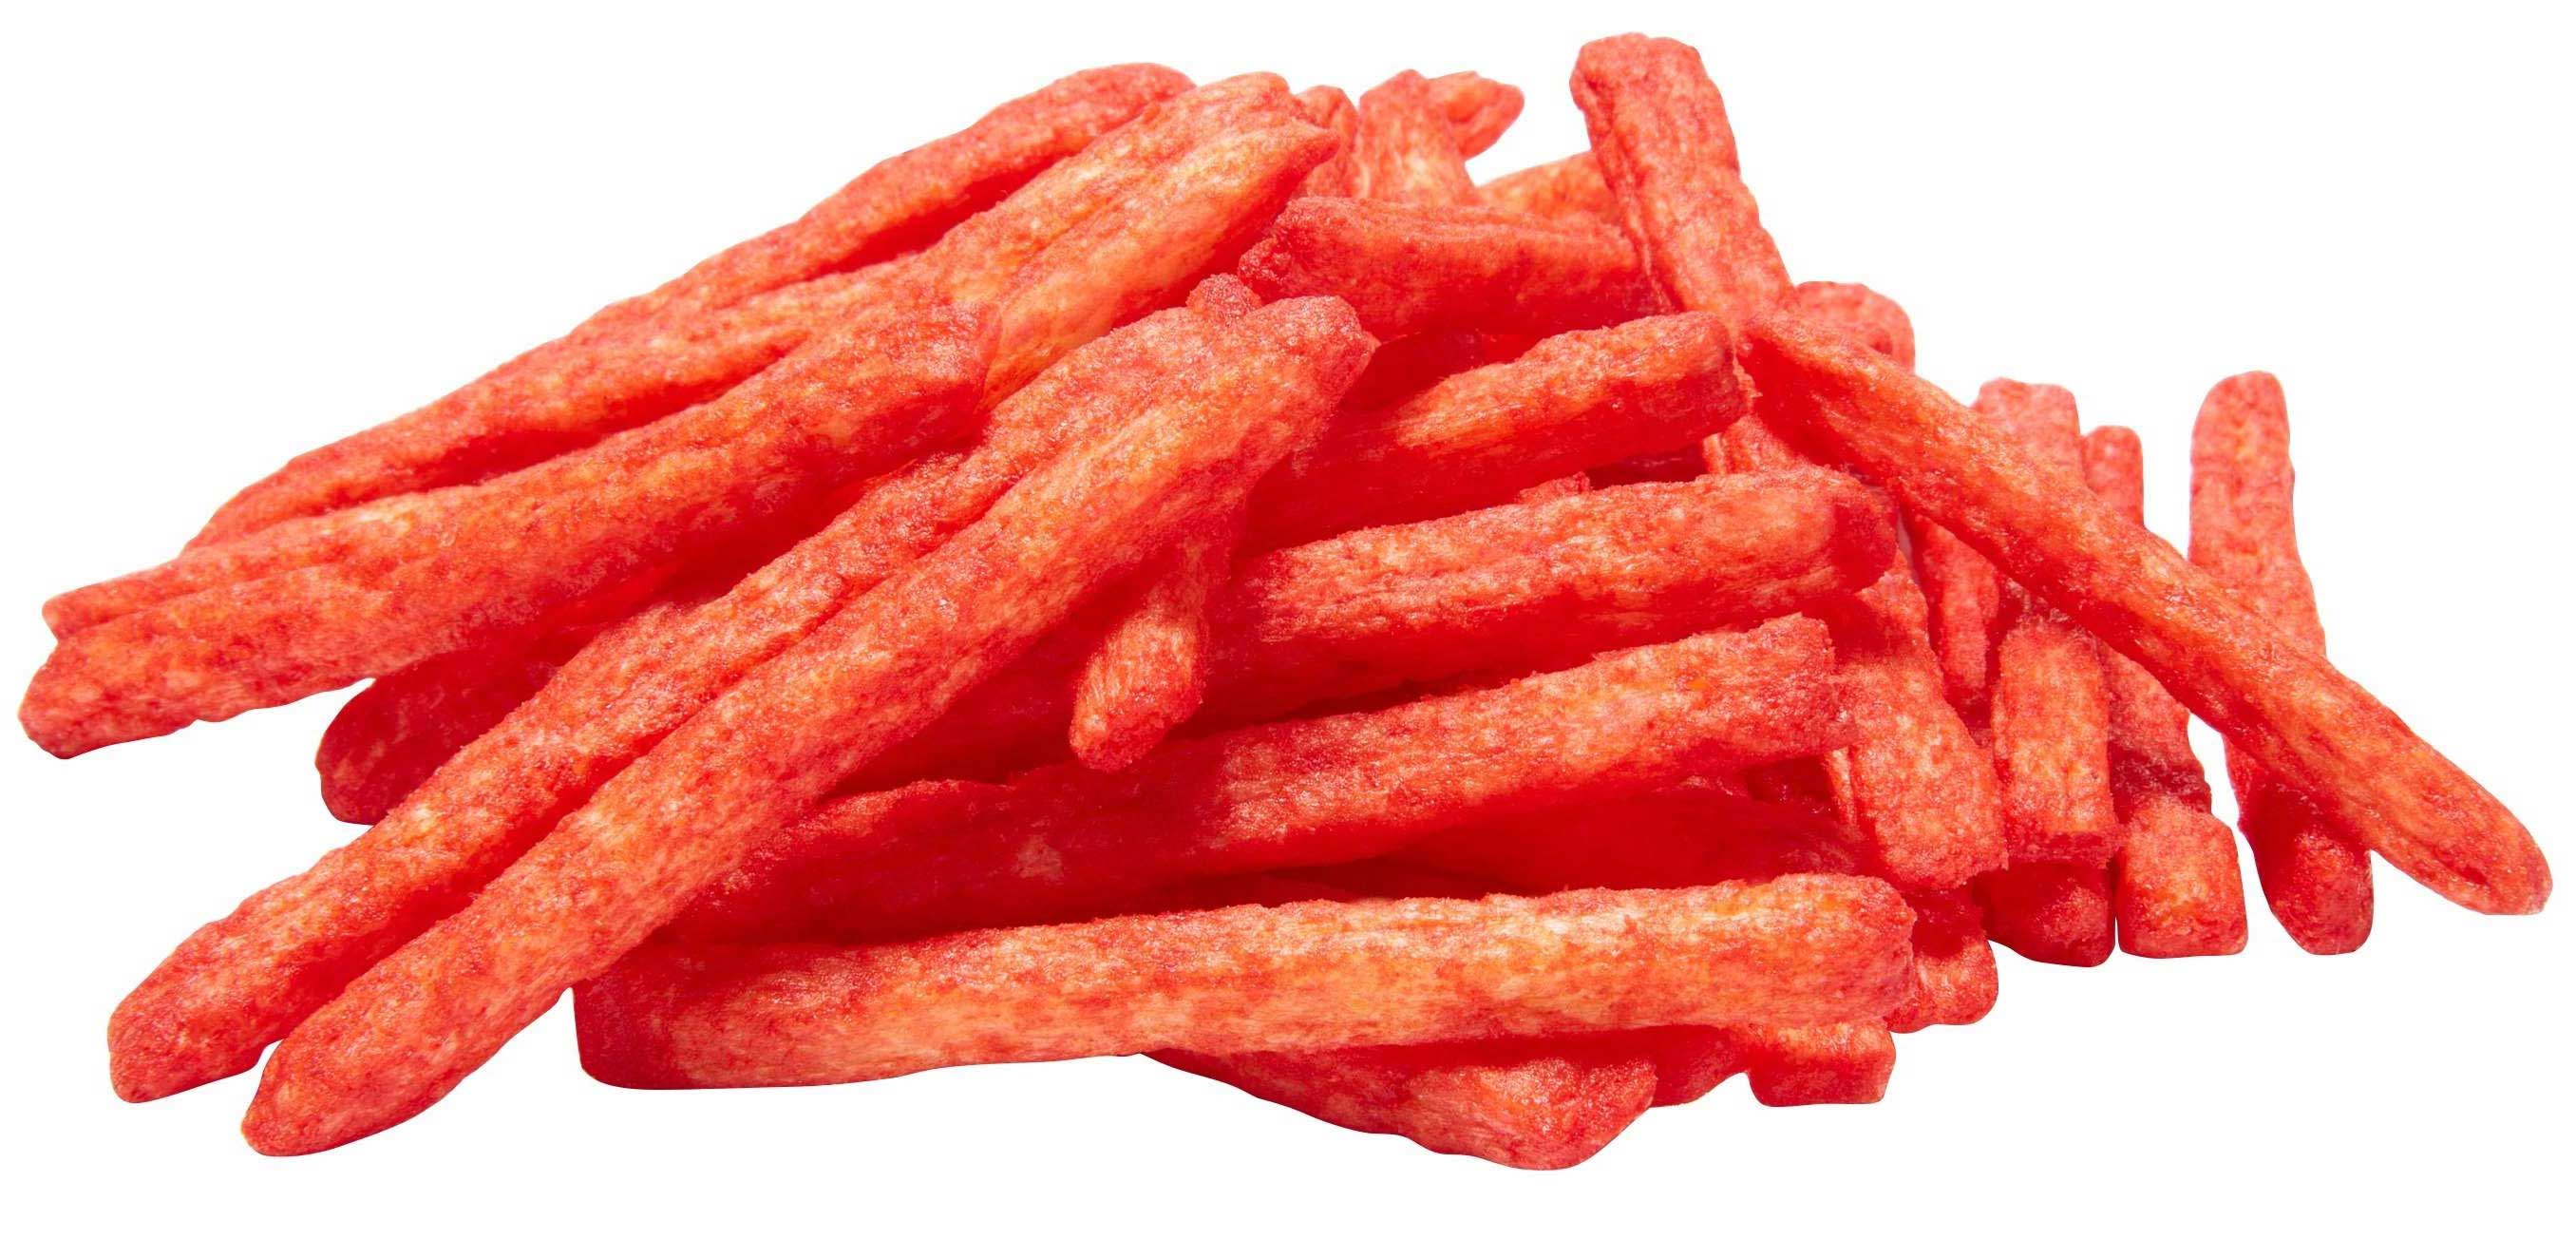 15-hot-facts-about-hot-fries-ingredients